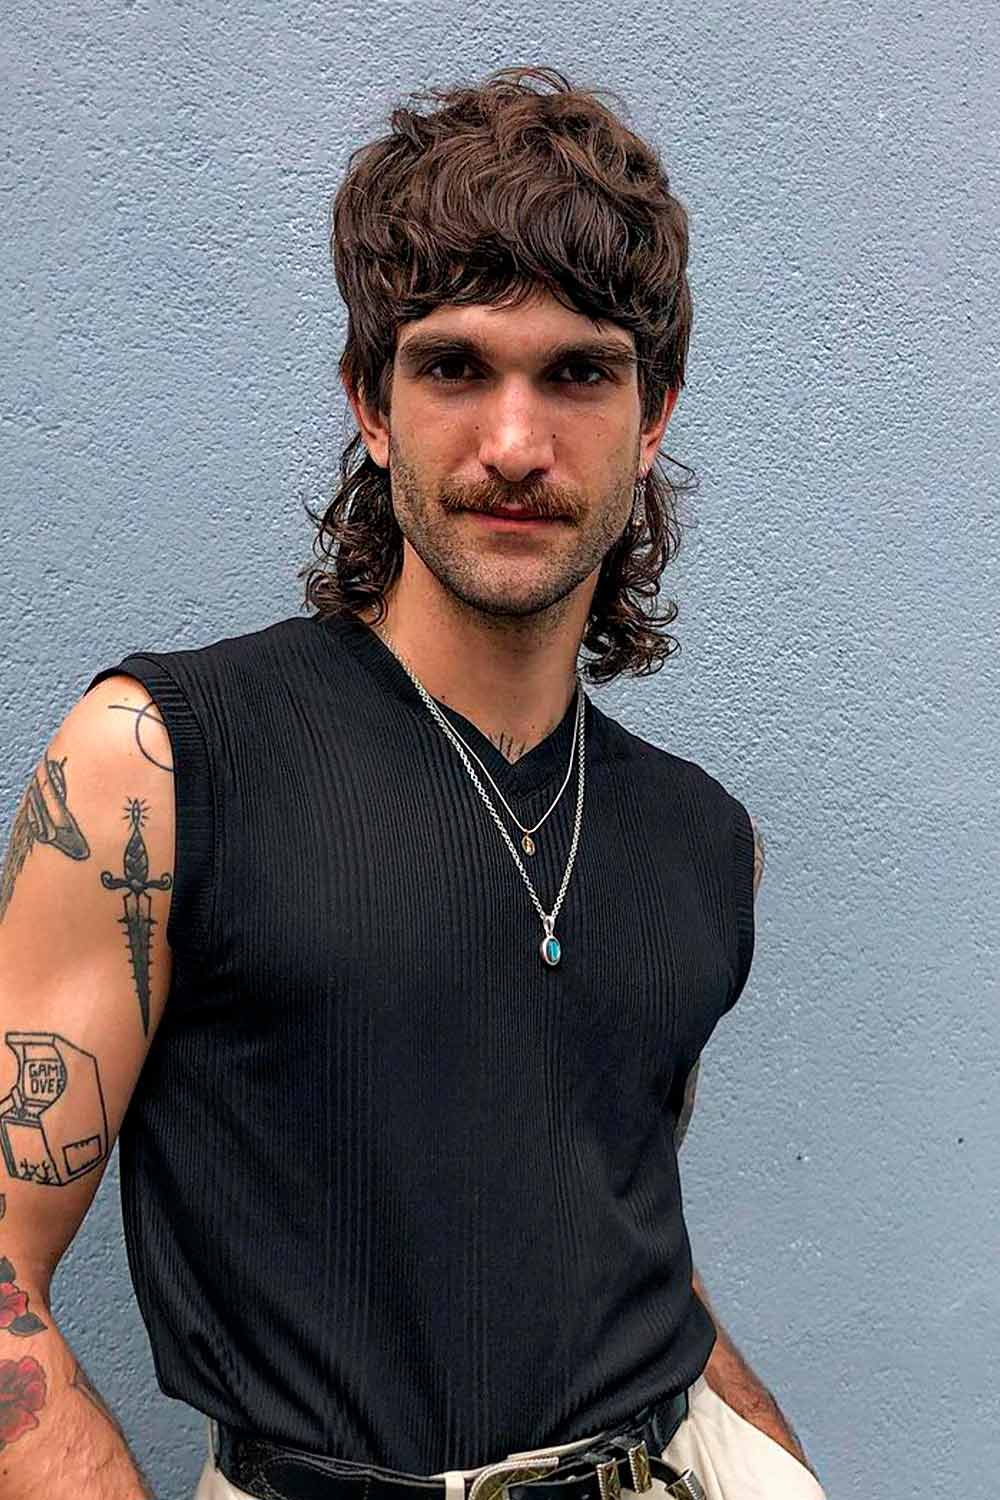 Male Wolfcut On Wavy Hair Men #wolfcutmen #wolfhairstylemen #wolfhaircut